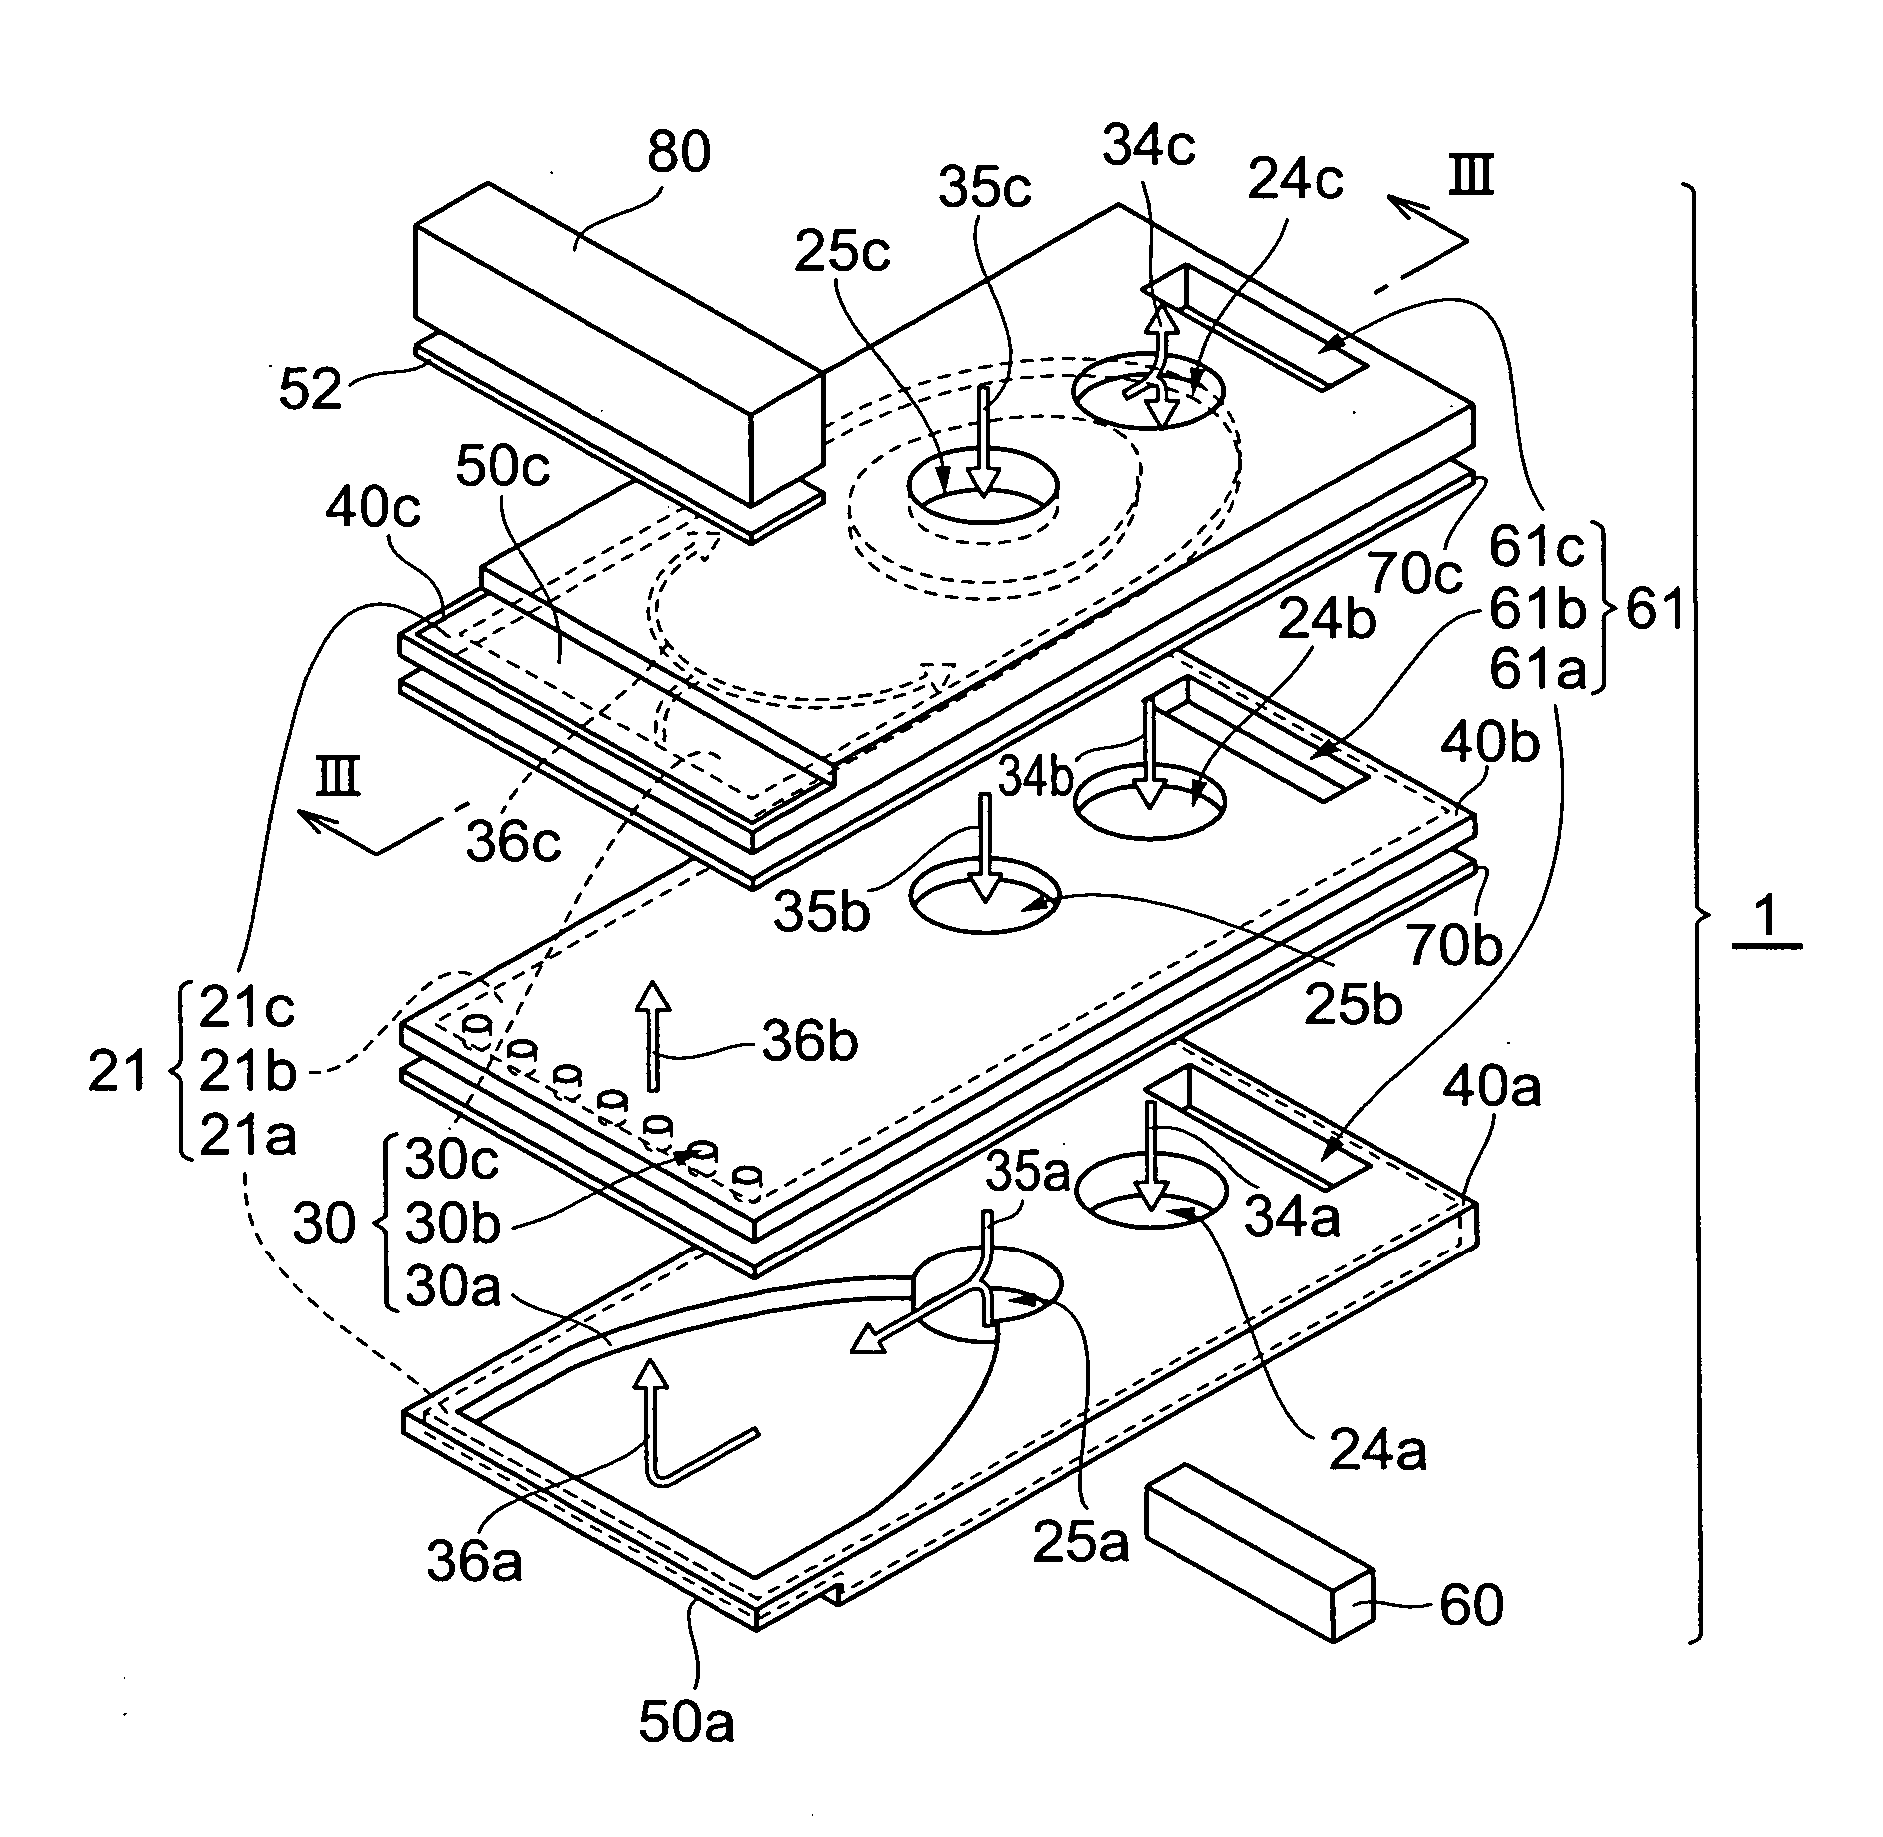 Semiconductor Laser Device